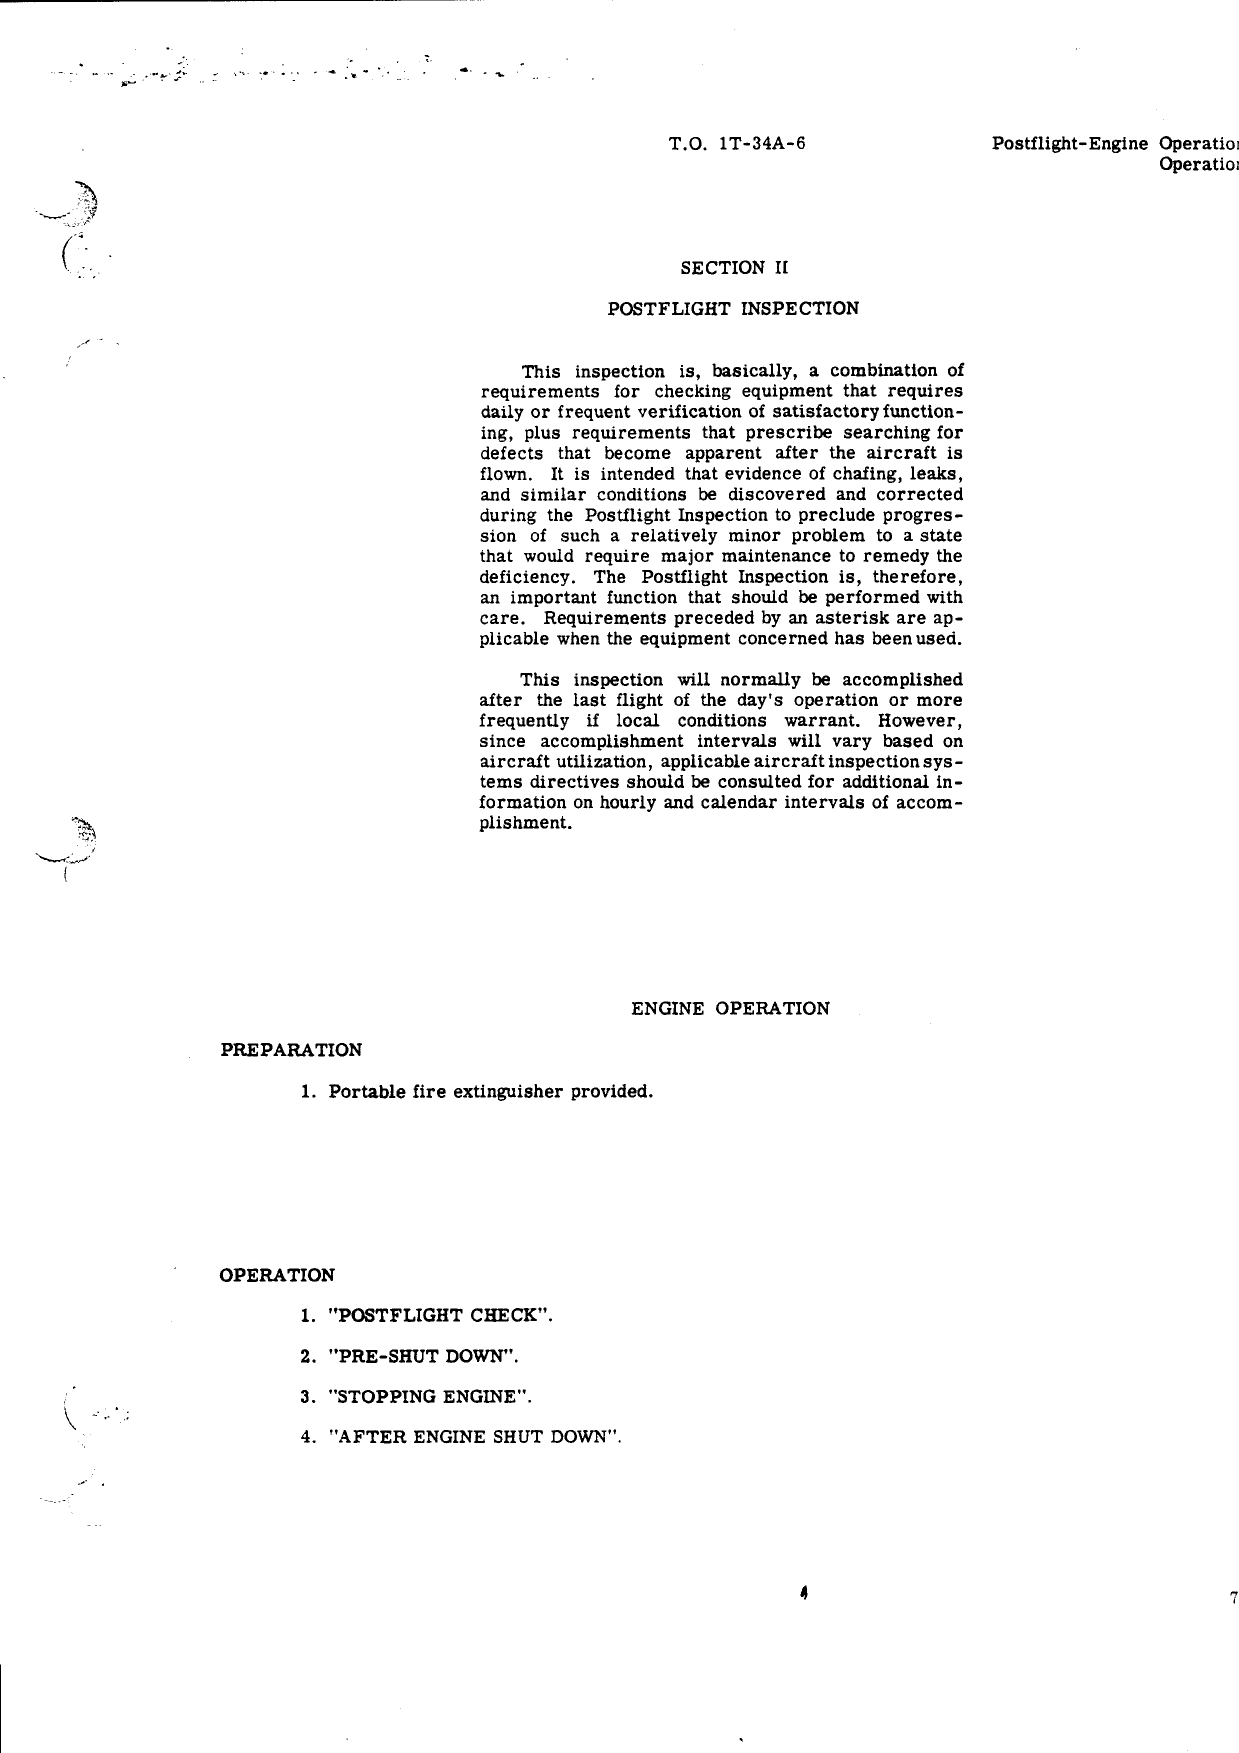 Sample page 11 from AirCorps Library document: Handbook Inspection Requirements for USAF Series T-34A Aircraft